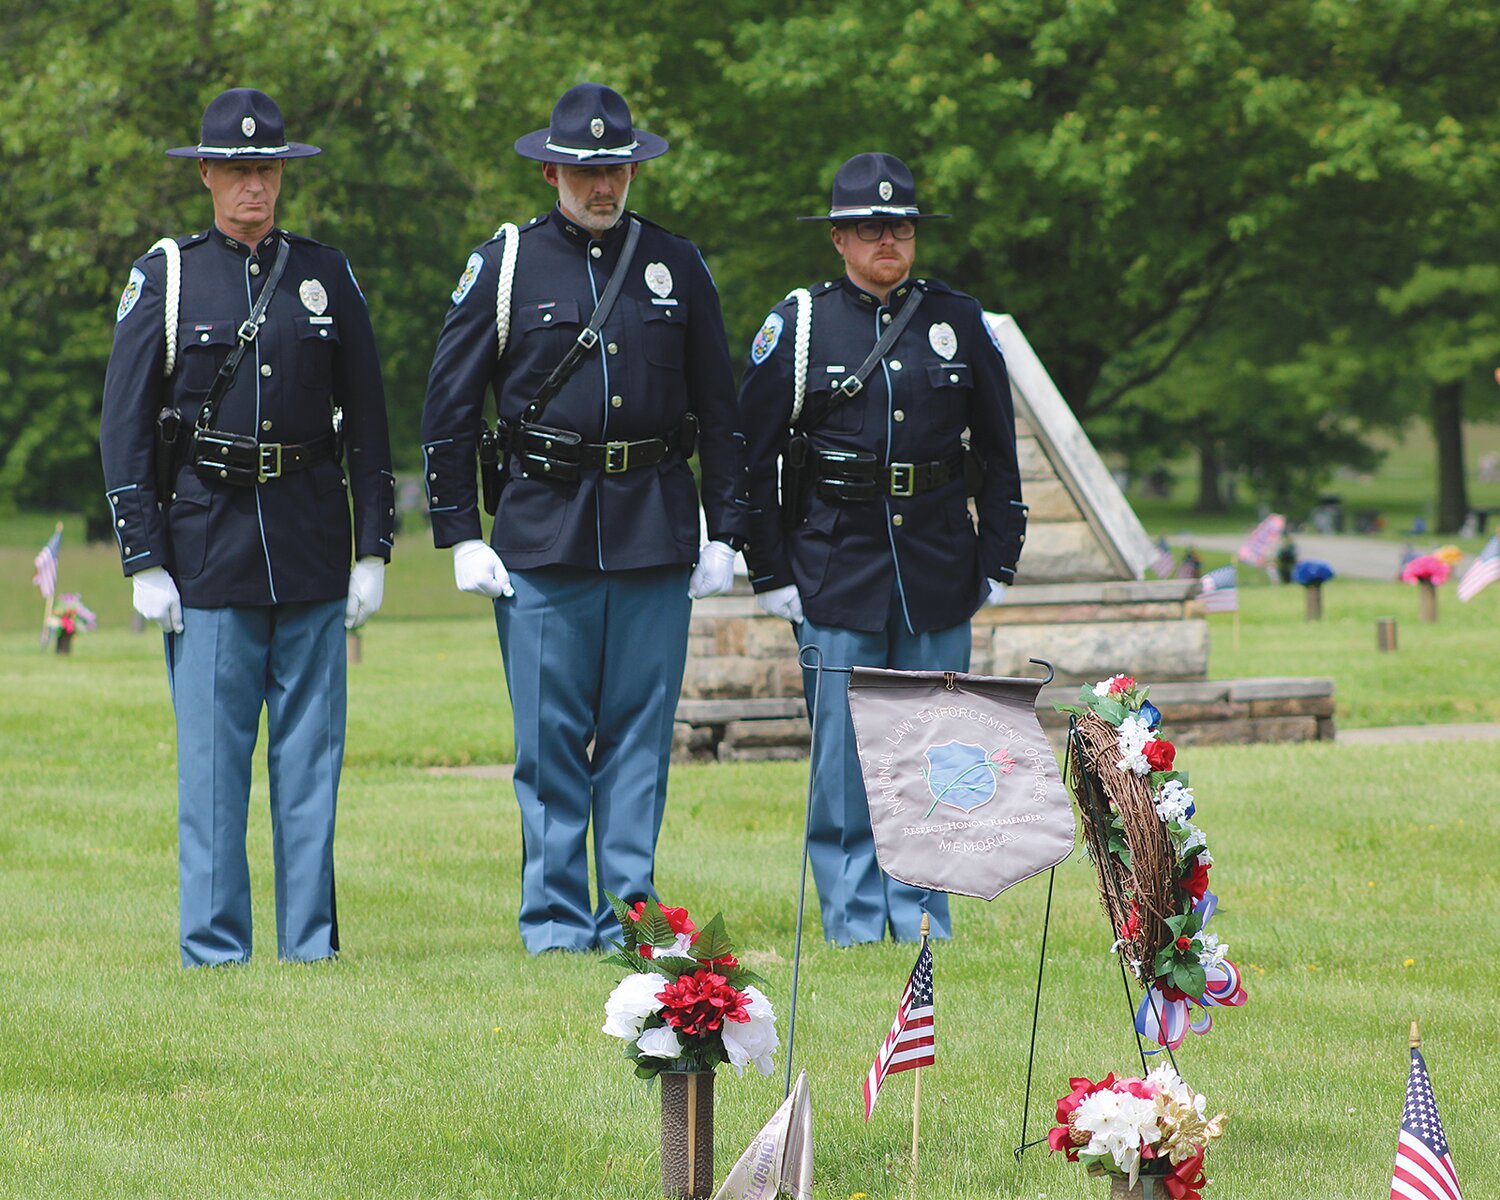 Officers pay their respect Wednesday at Oak Hill North Cemetery after laying a wreath on the grave of Leslie Oaks, a county deputy who was killed in the line of duty in May of 1982.